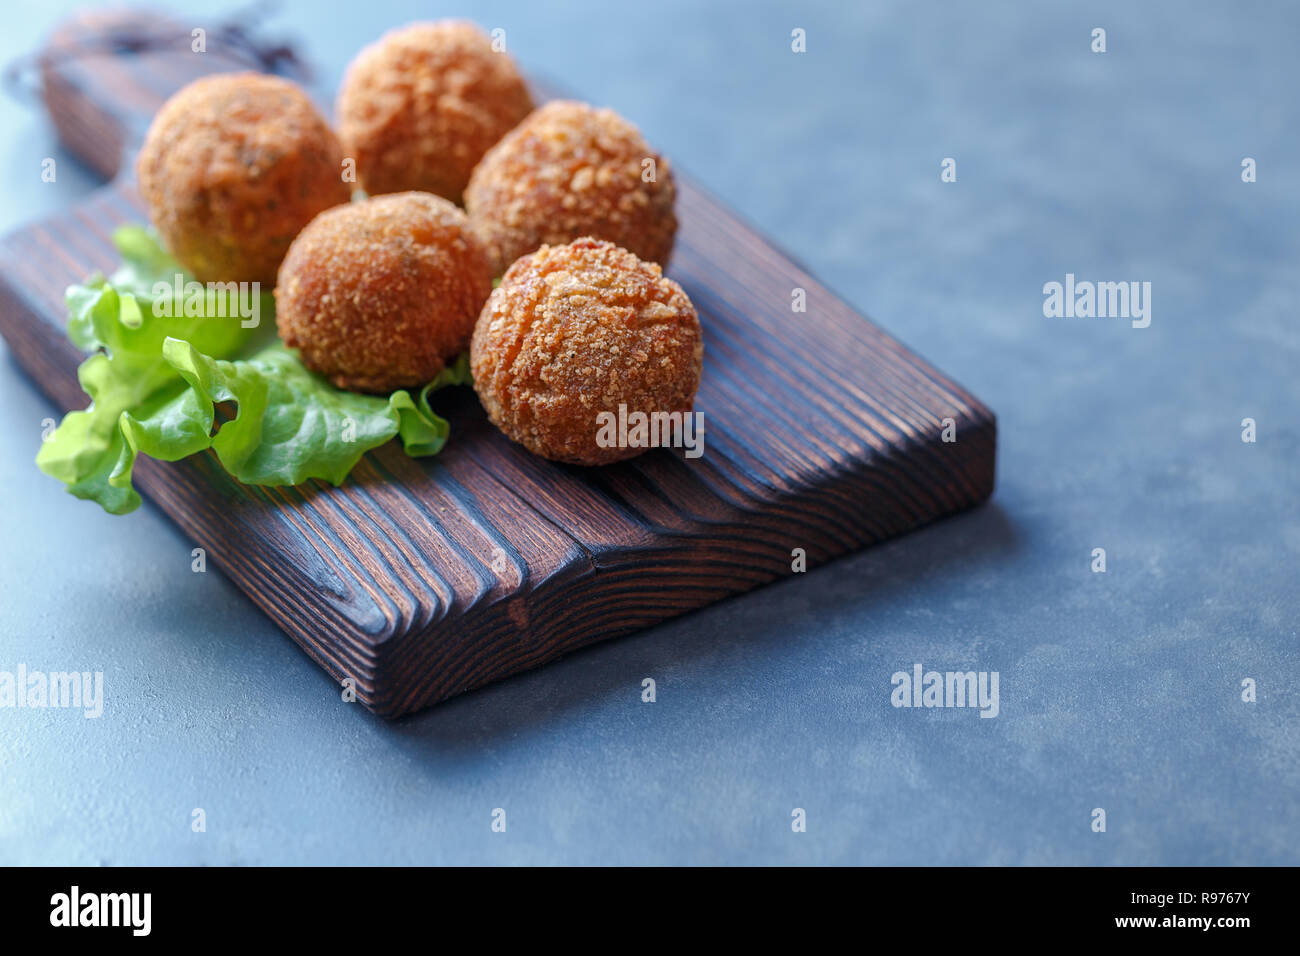 Falafel lies on a wooden cutting board. On the table lie tomatoes, cucumbers, lettuce, dill, lemon, sour cream. Stock Photo